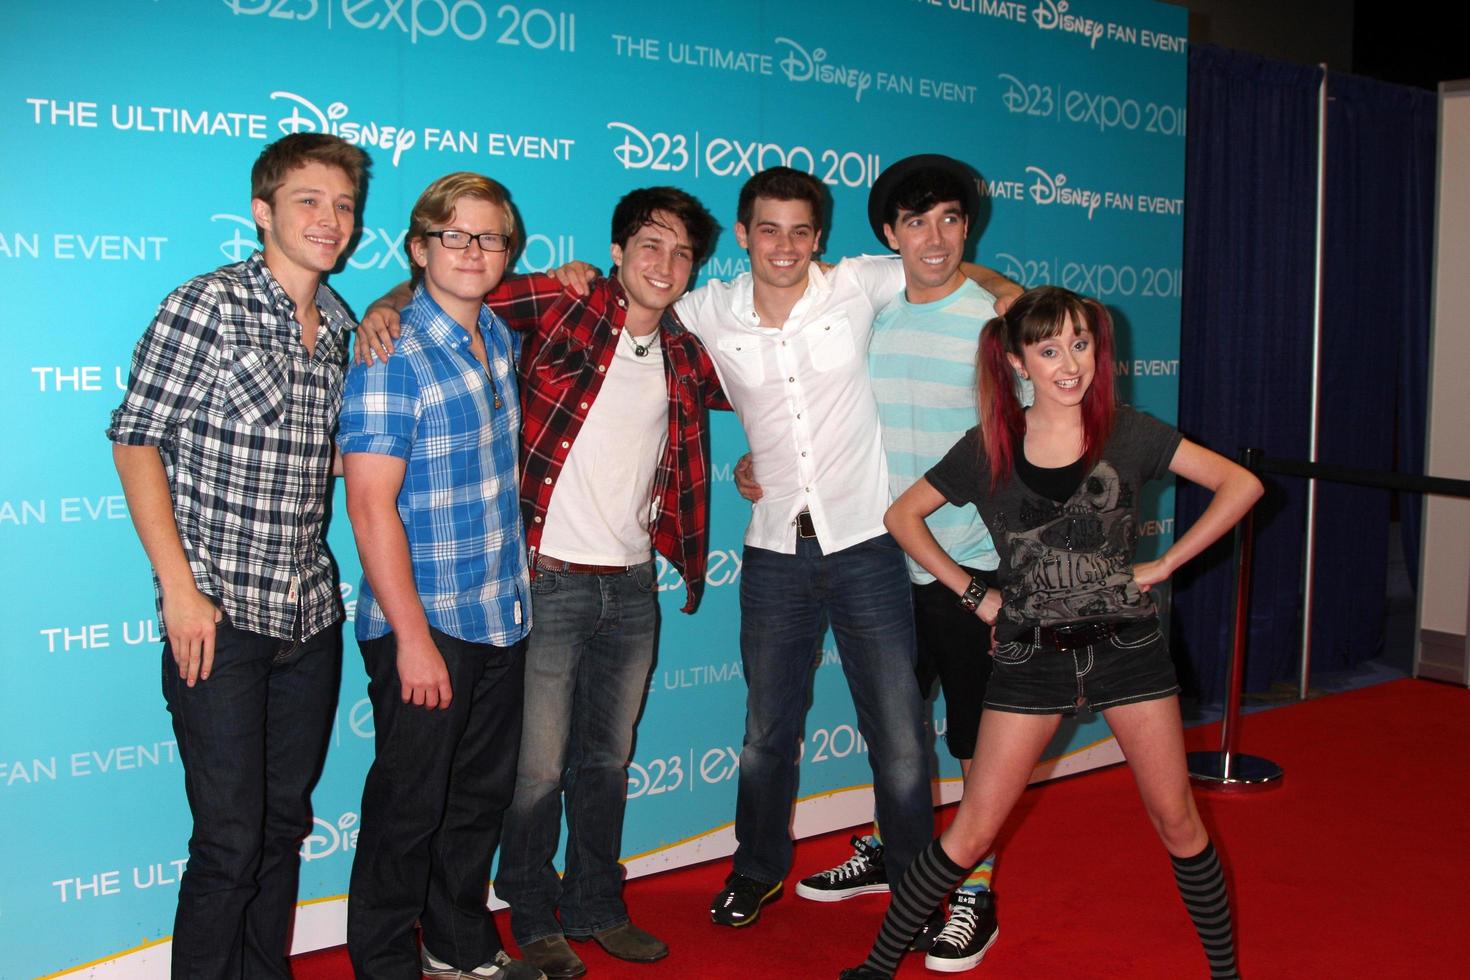 LOS ANGELES, AUG 19 -  So Random Cast Members including Tiffany Thornton, Doug Bruchu, Sterling Knight, Allisyn Ashley Arm at the D23 Expo 2011 at the Anaheim Convention Center on August 19, 2011 in Anaheim, CA photo